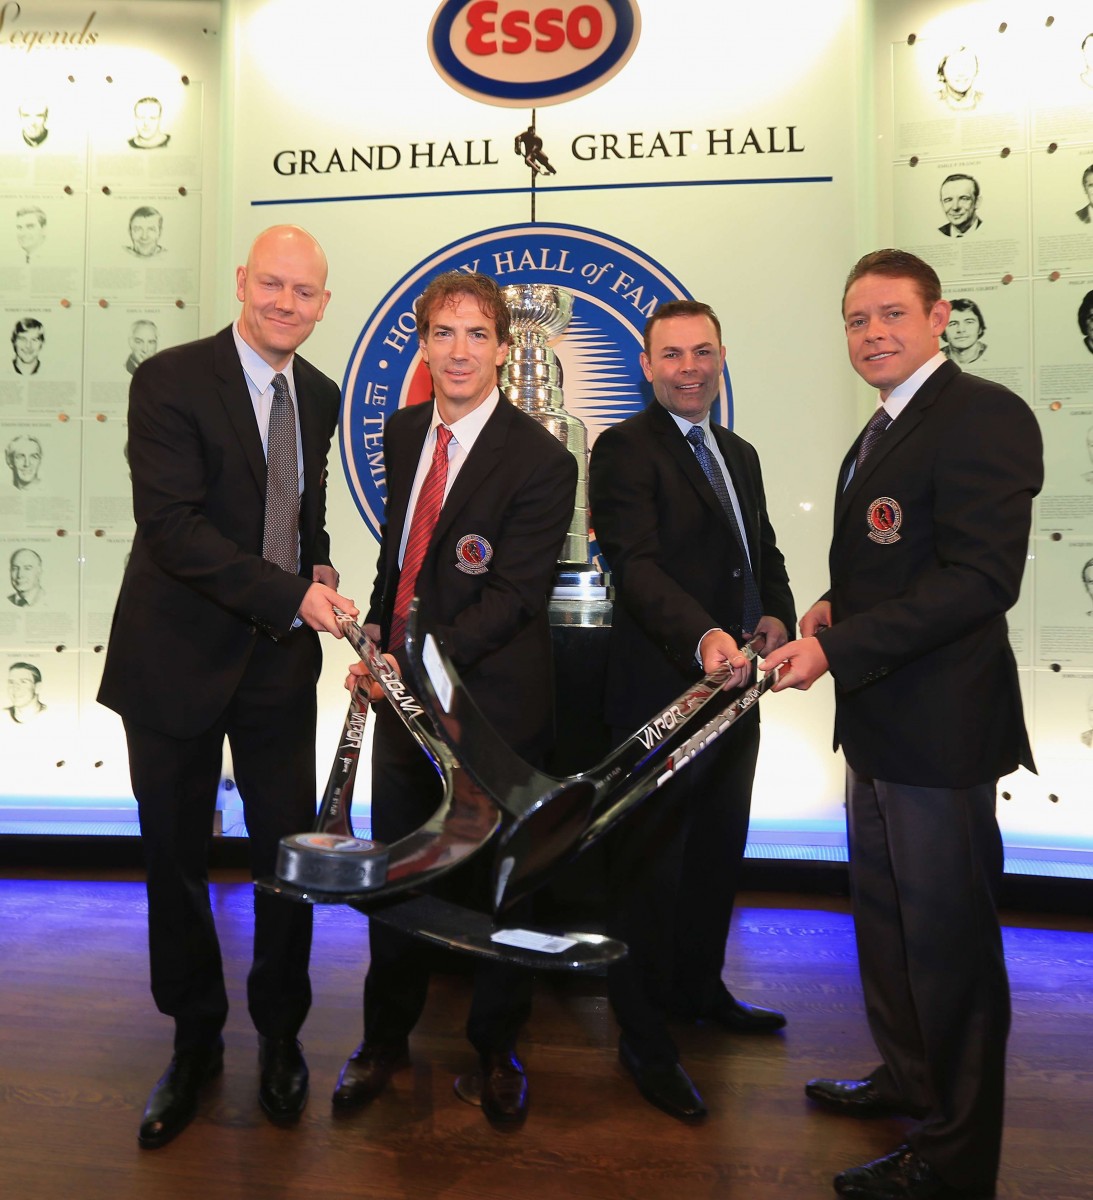 From left to right, Mats Sundin, Joe Sakic, Adam Oates, and Pavel Bure pose at the Hockey Hall of Fame in Toronto on Nov. 12, 2012. All four were inducted into the Hall of Fame on Monday night. (Bruce Bennett/Getty Images)